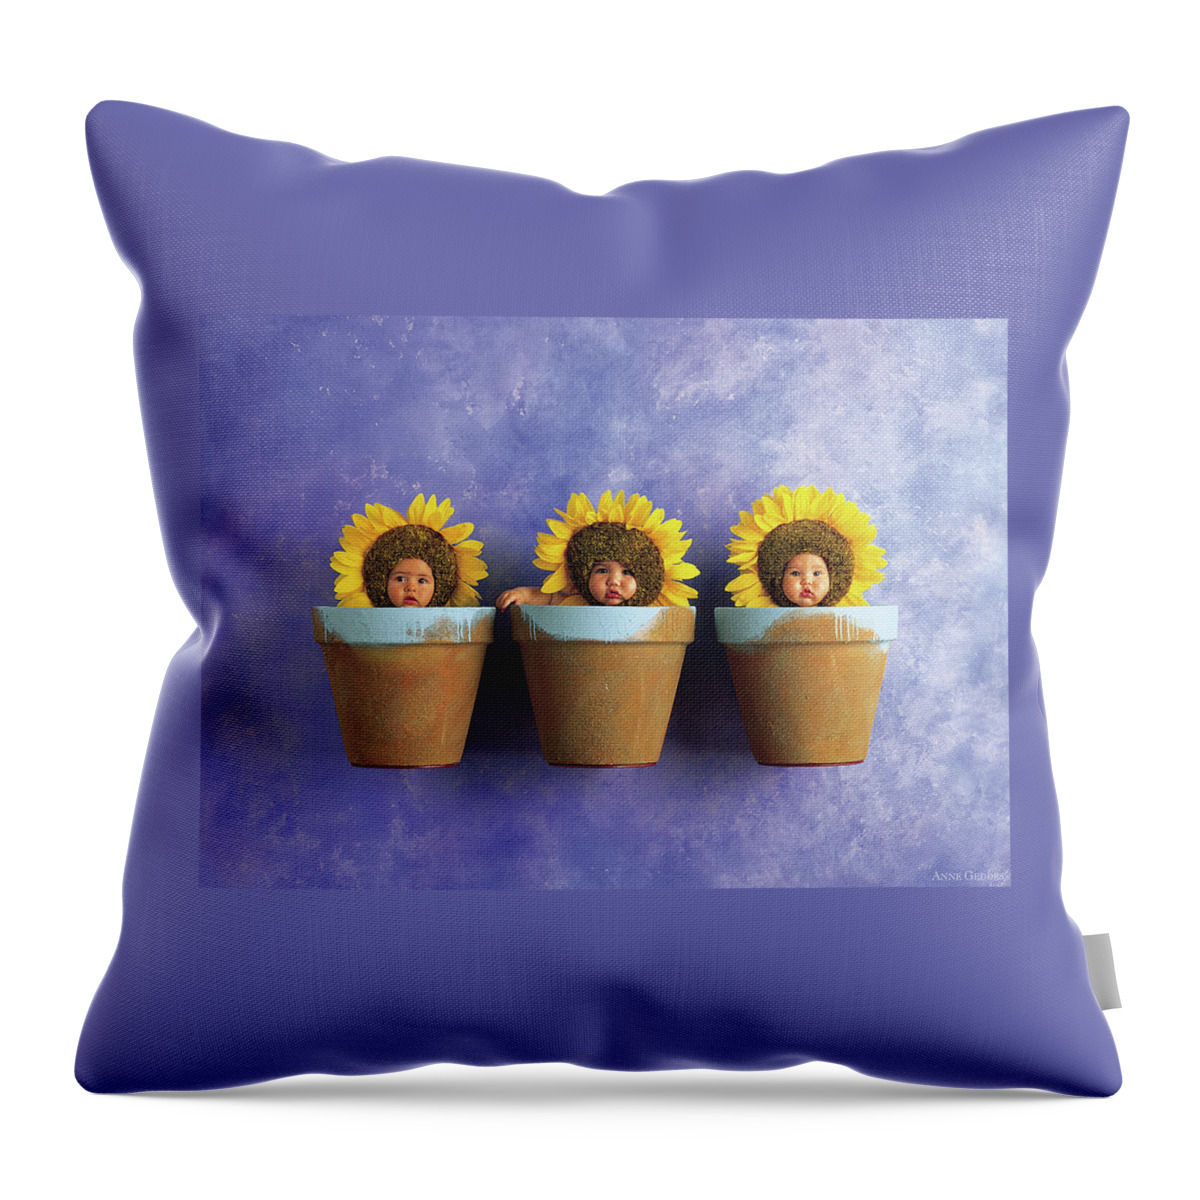 Sunflower Throw Pillow featuring the photograph Sunflower Pots by Anne Geddes